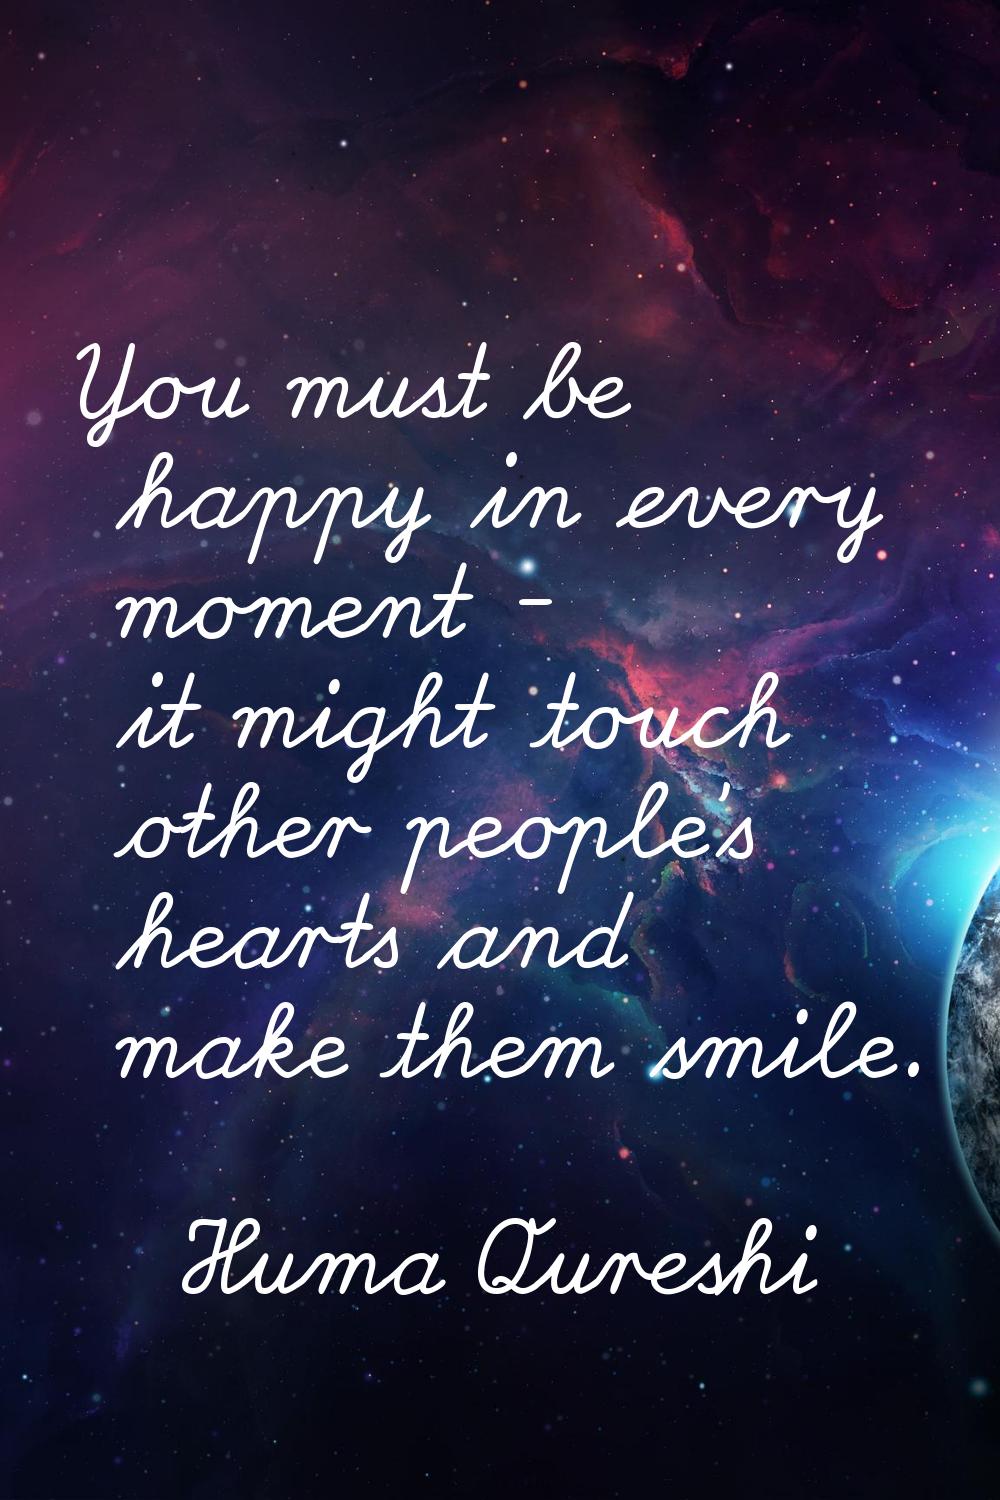 You must be happy in every moment - it might touch other people's hearts and make them smile.